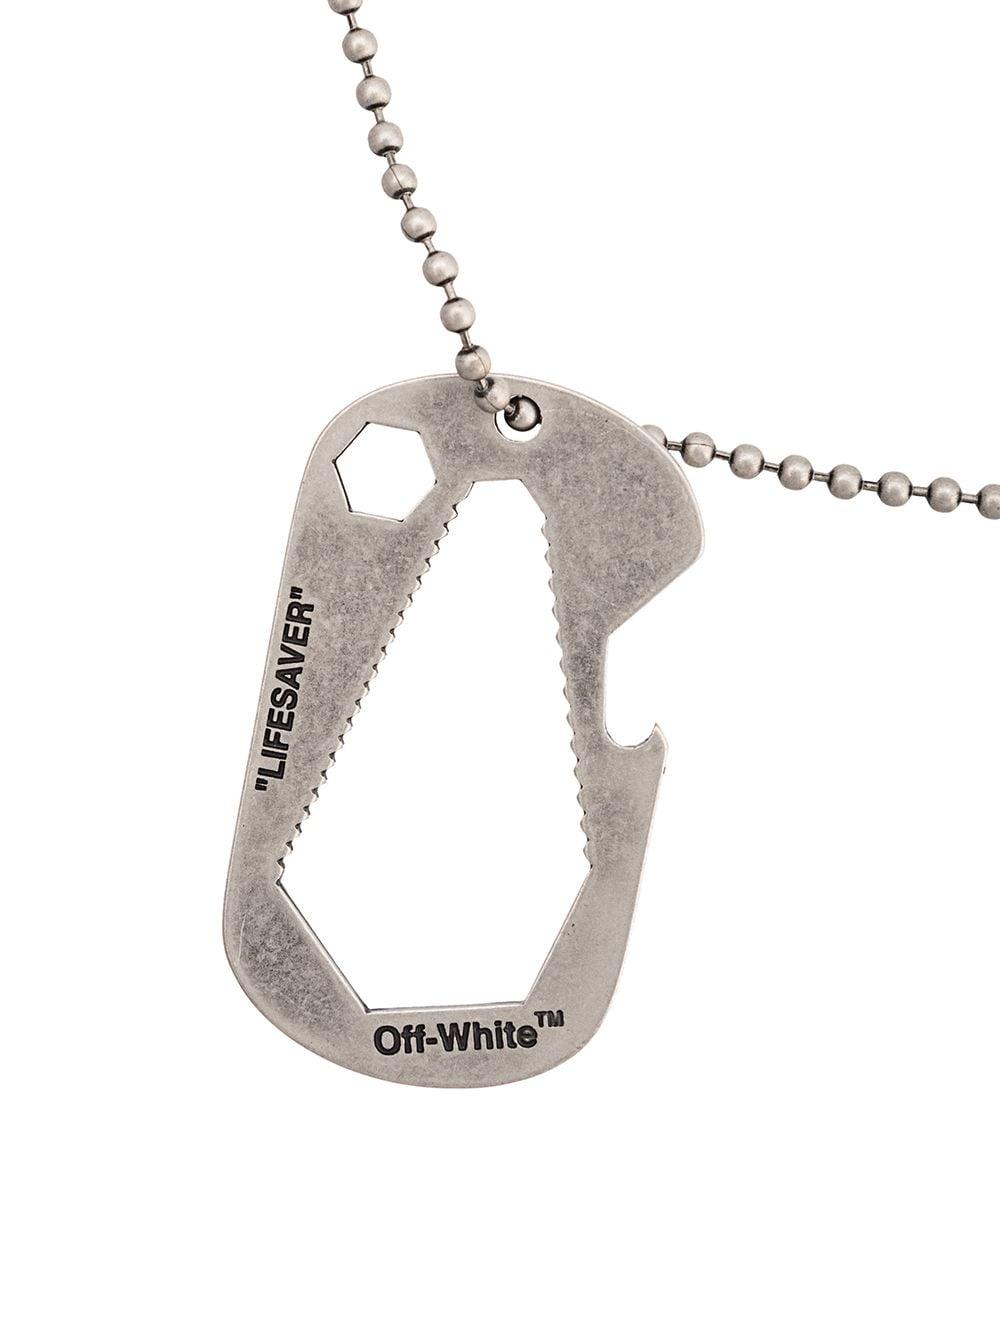 Brand New In Box Off White Virgil Abloh Lifesaver Tool Metal Silver Necklace